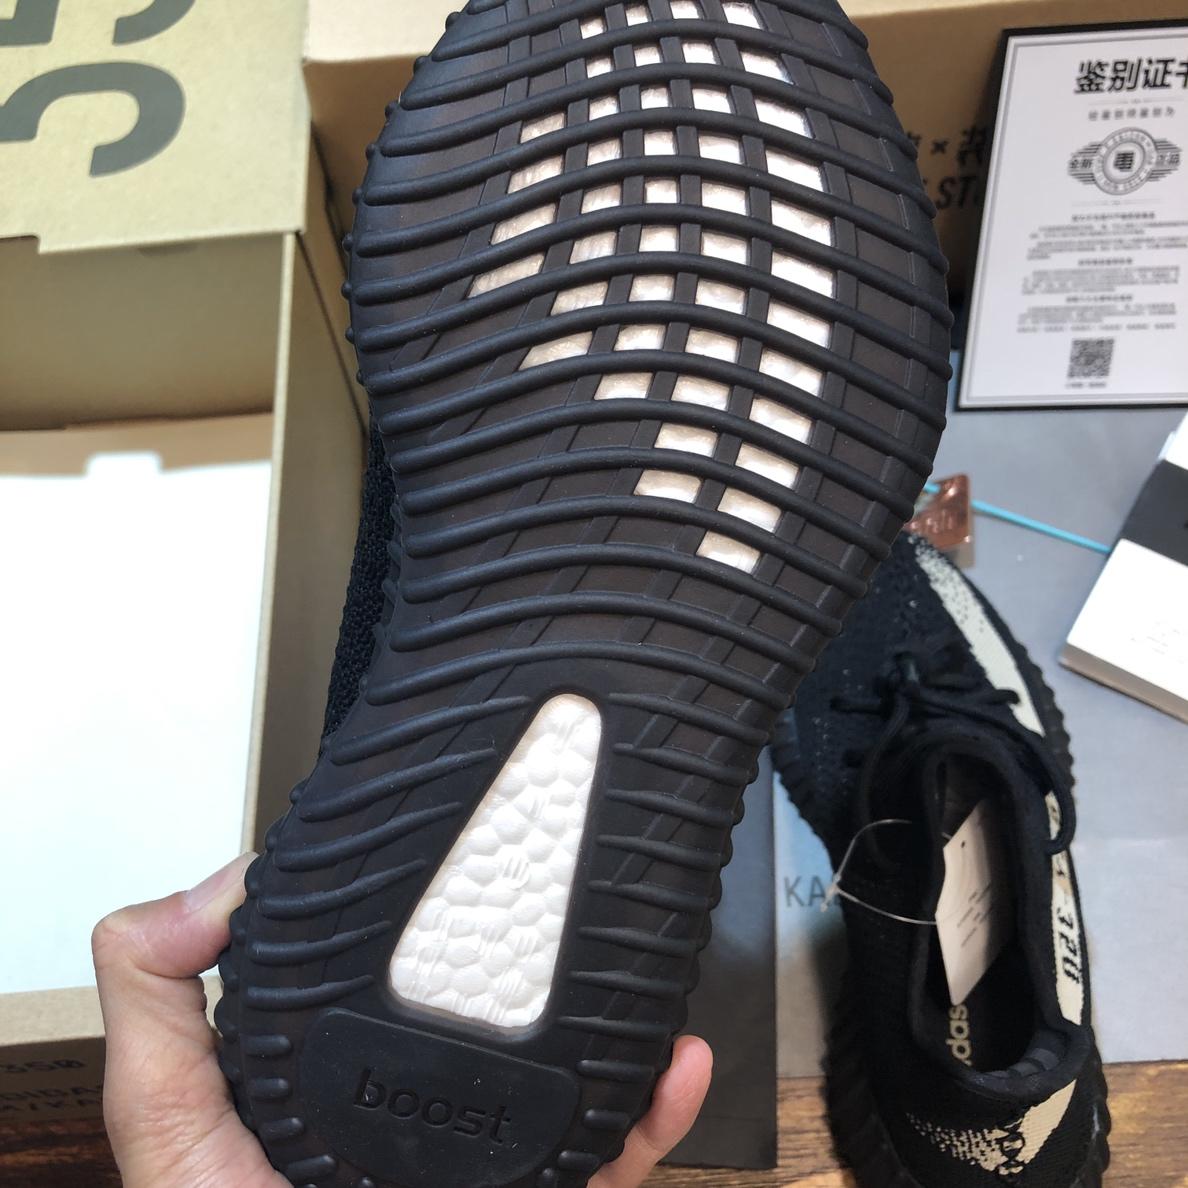 High Quality Yeezy Boost 350 V2 Oreo BY9611 Sneaker DZH00A008